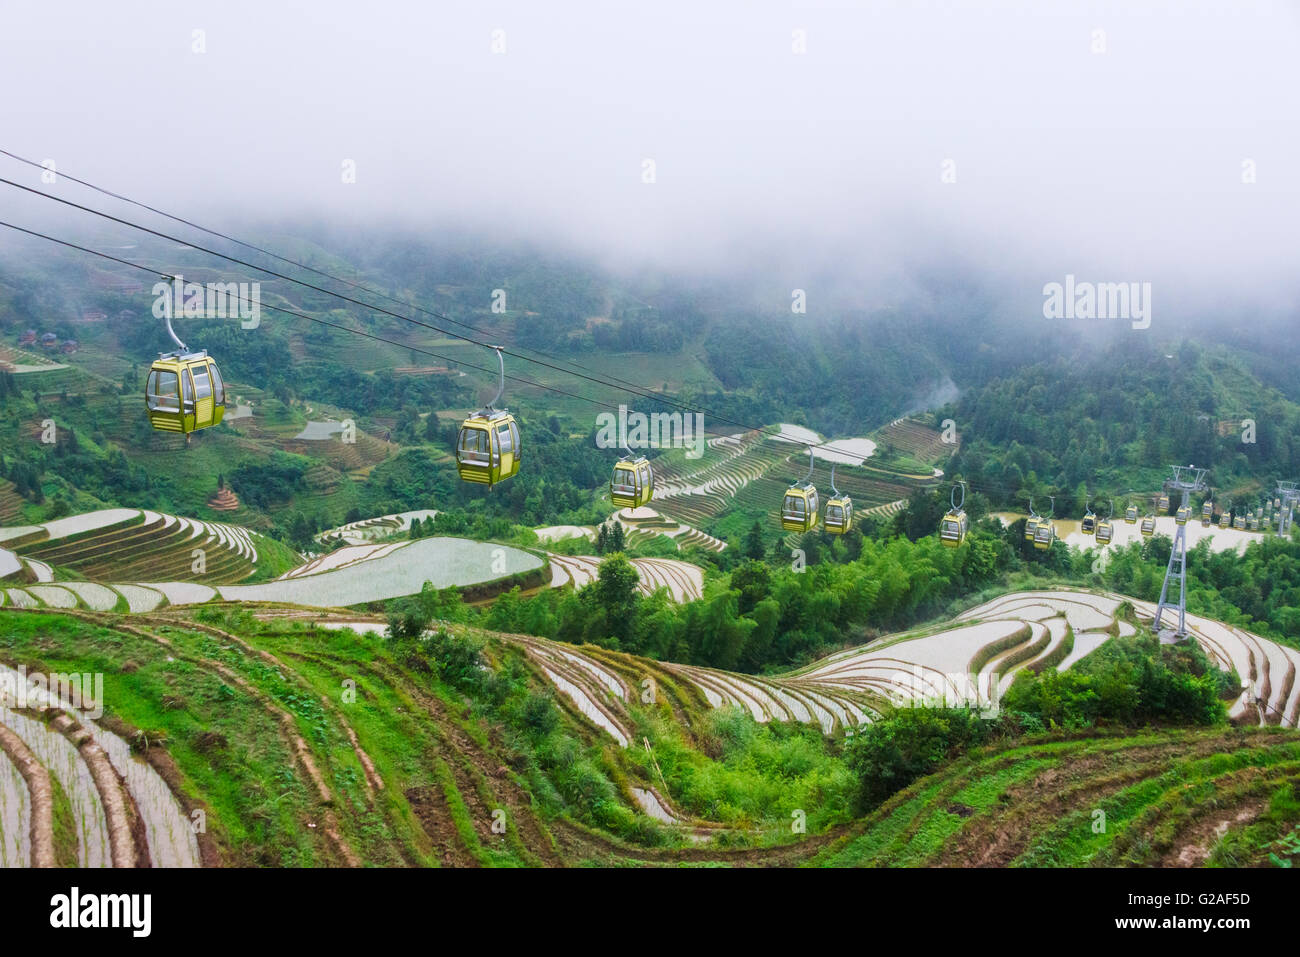 Aerial tram above the rice terraces in the mountain, Dazhai, Guangxi Province, China Stock Photo